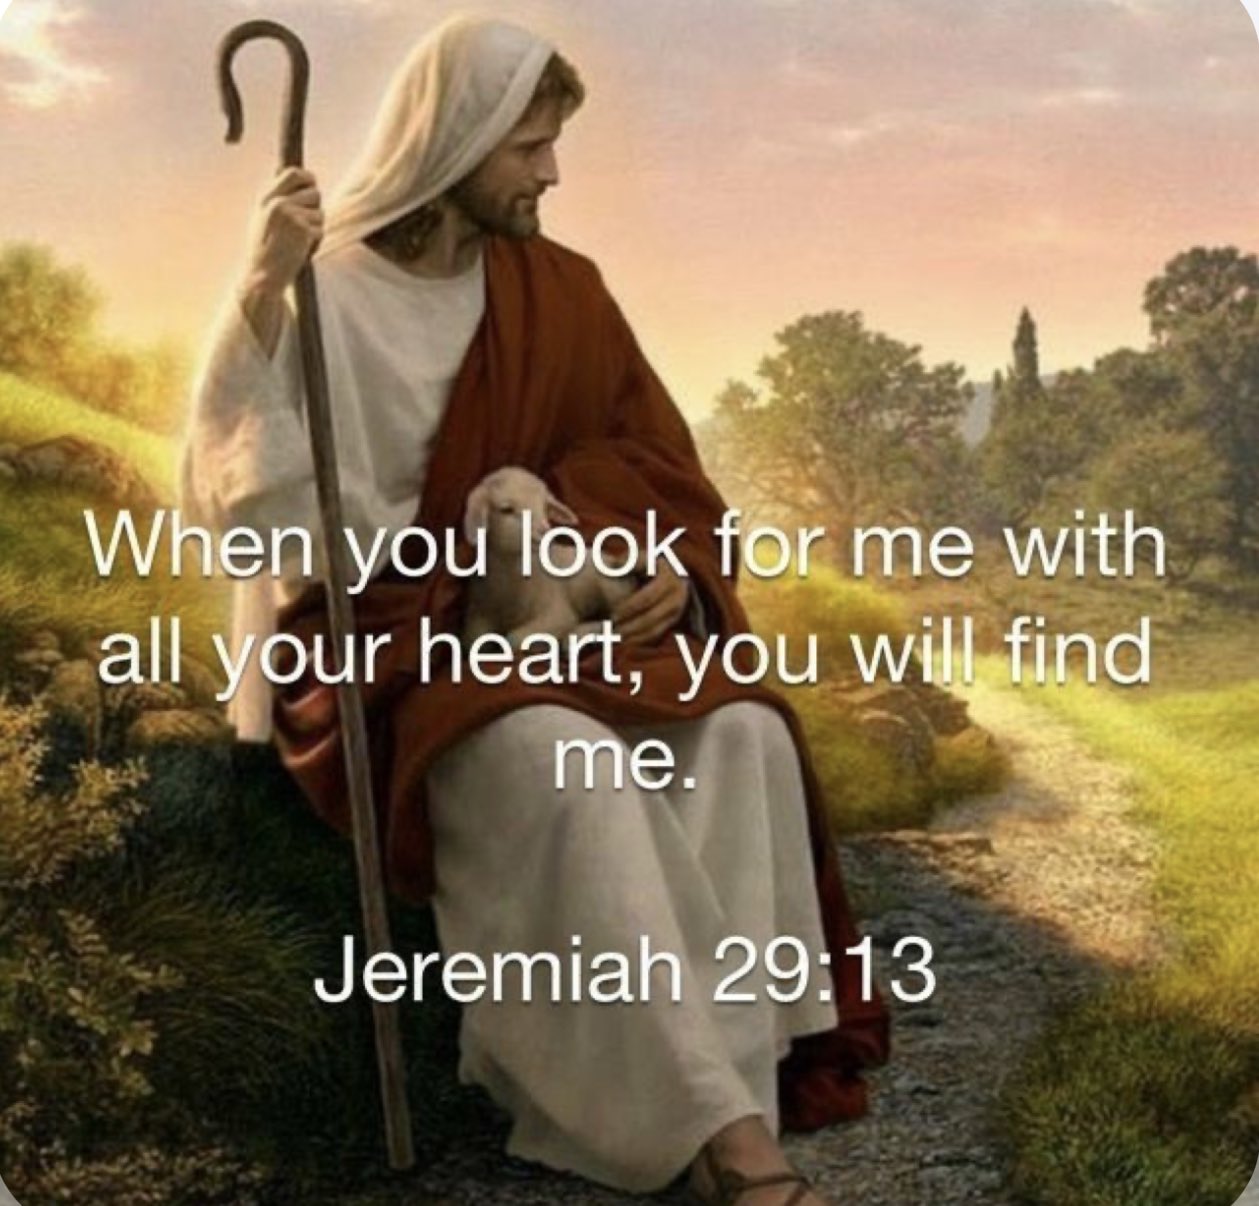 When you look for me with all your heart, you will find me Jeremiah 29.13